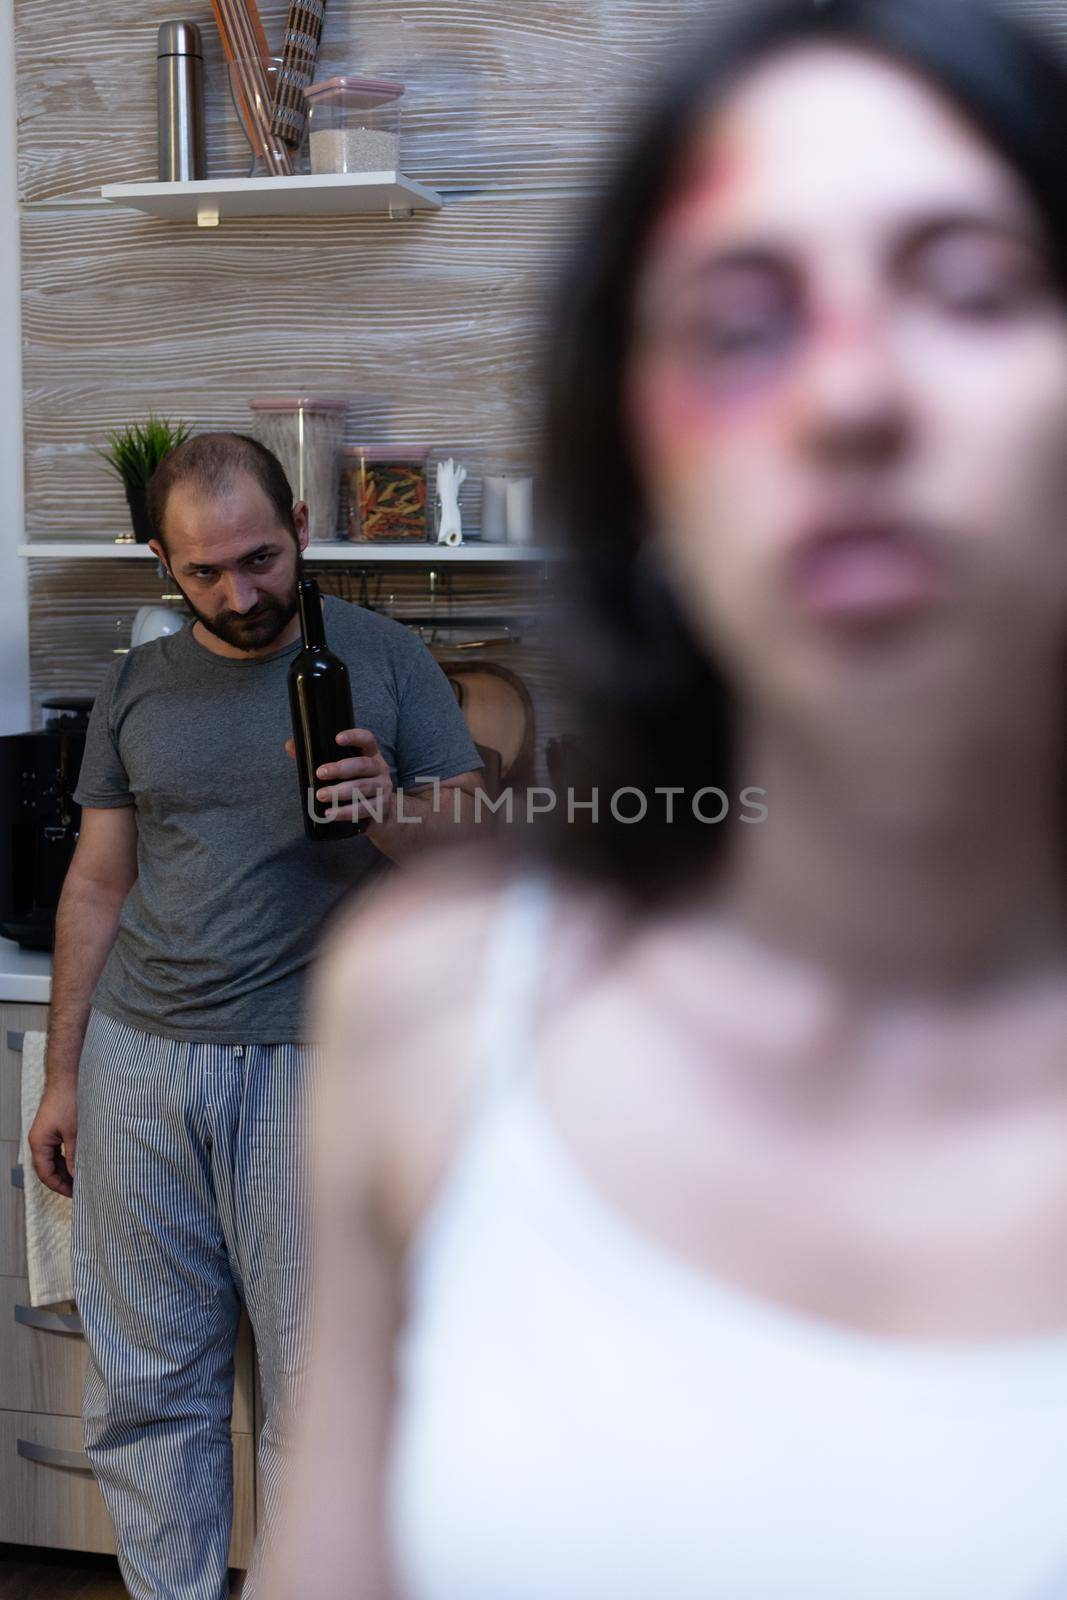 Woman having domestic violence bruises from partner while alcoholic angry man threatening to beat and fight. Couple with aggression issues feeling depressed in relationship, marriage